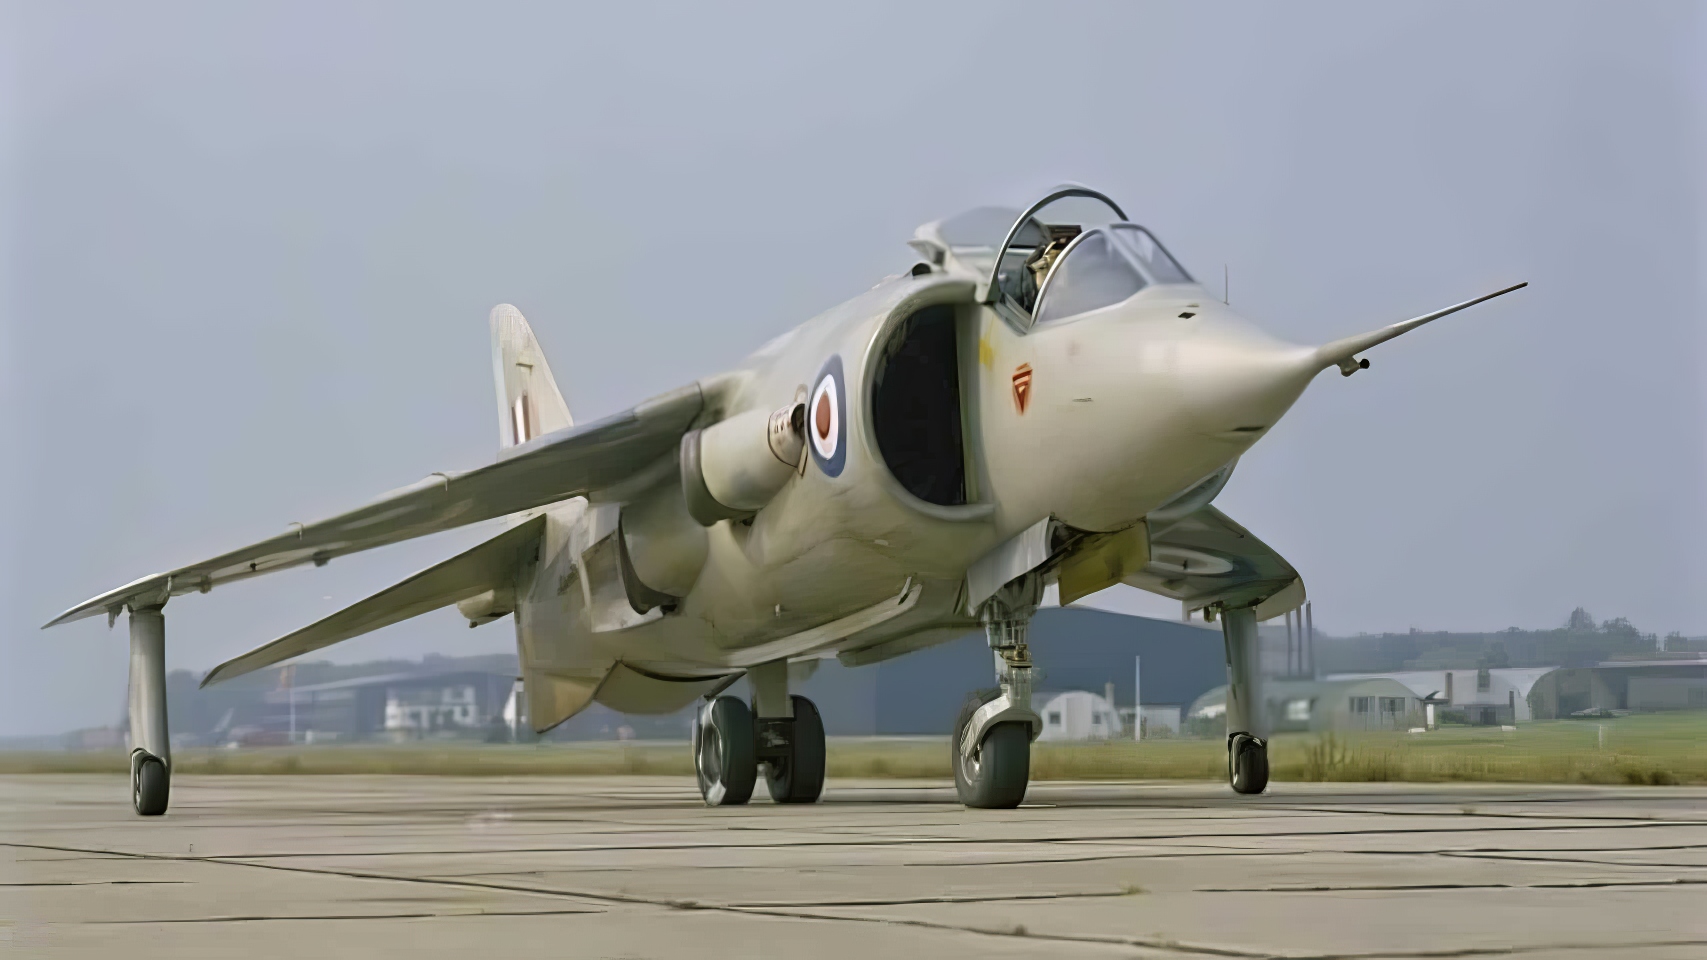 A Hawker Siddeley P.1127 after landing vertically on the test pad at Dunsfold